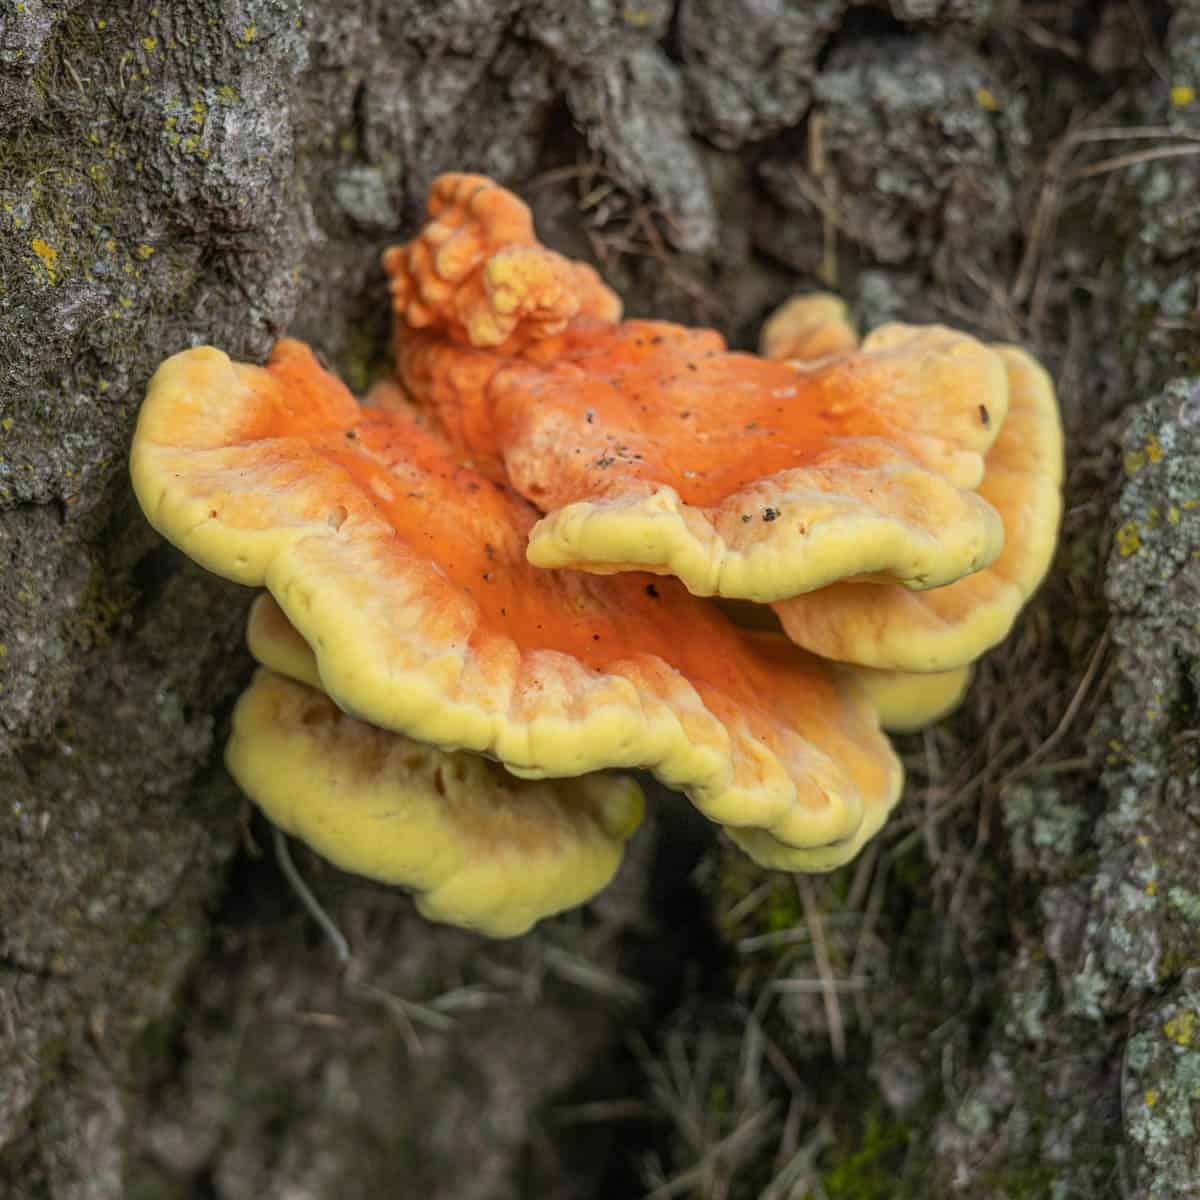 A close up of a yellow and orange mushroom growing on a tree.